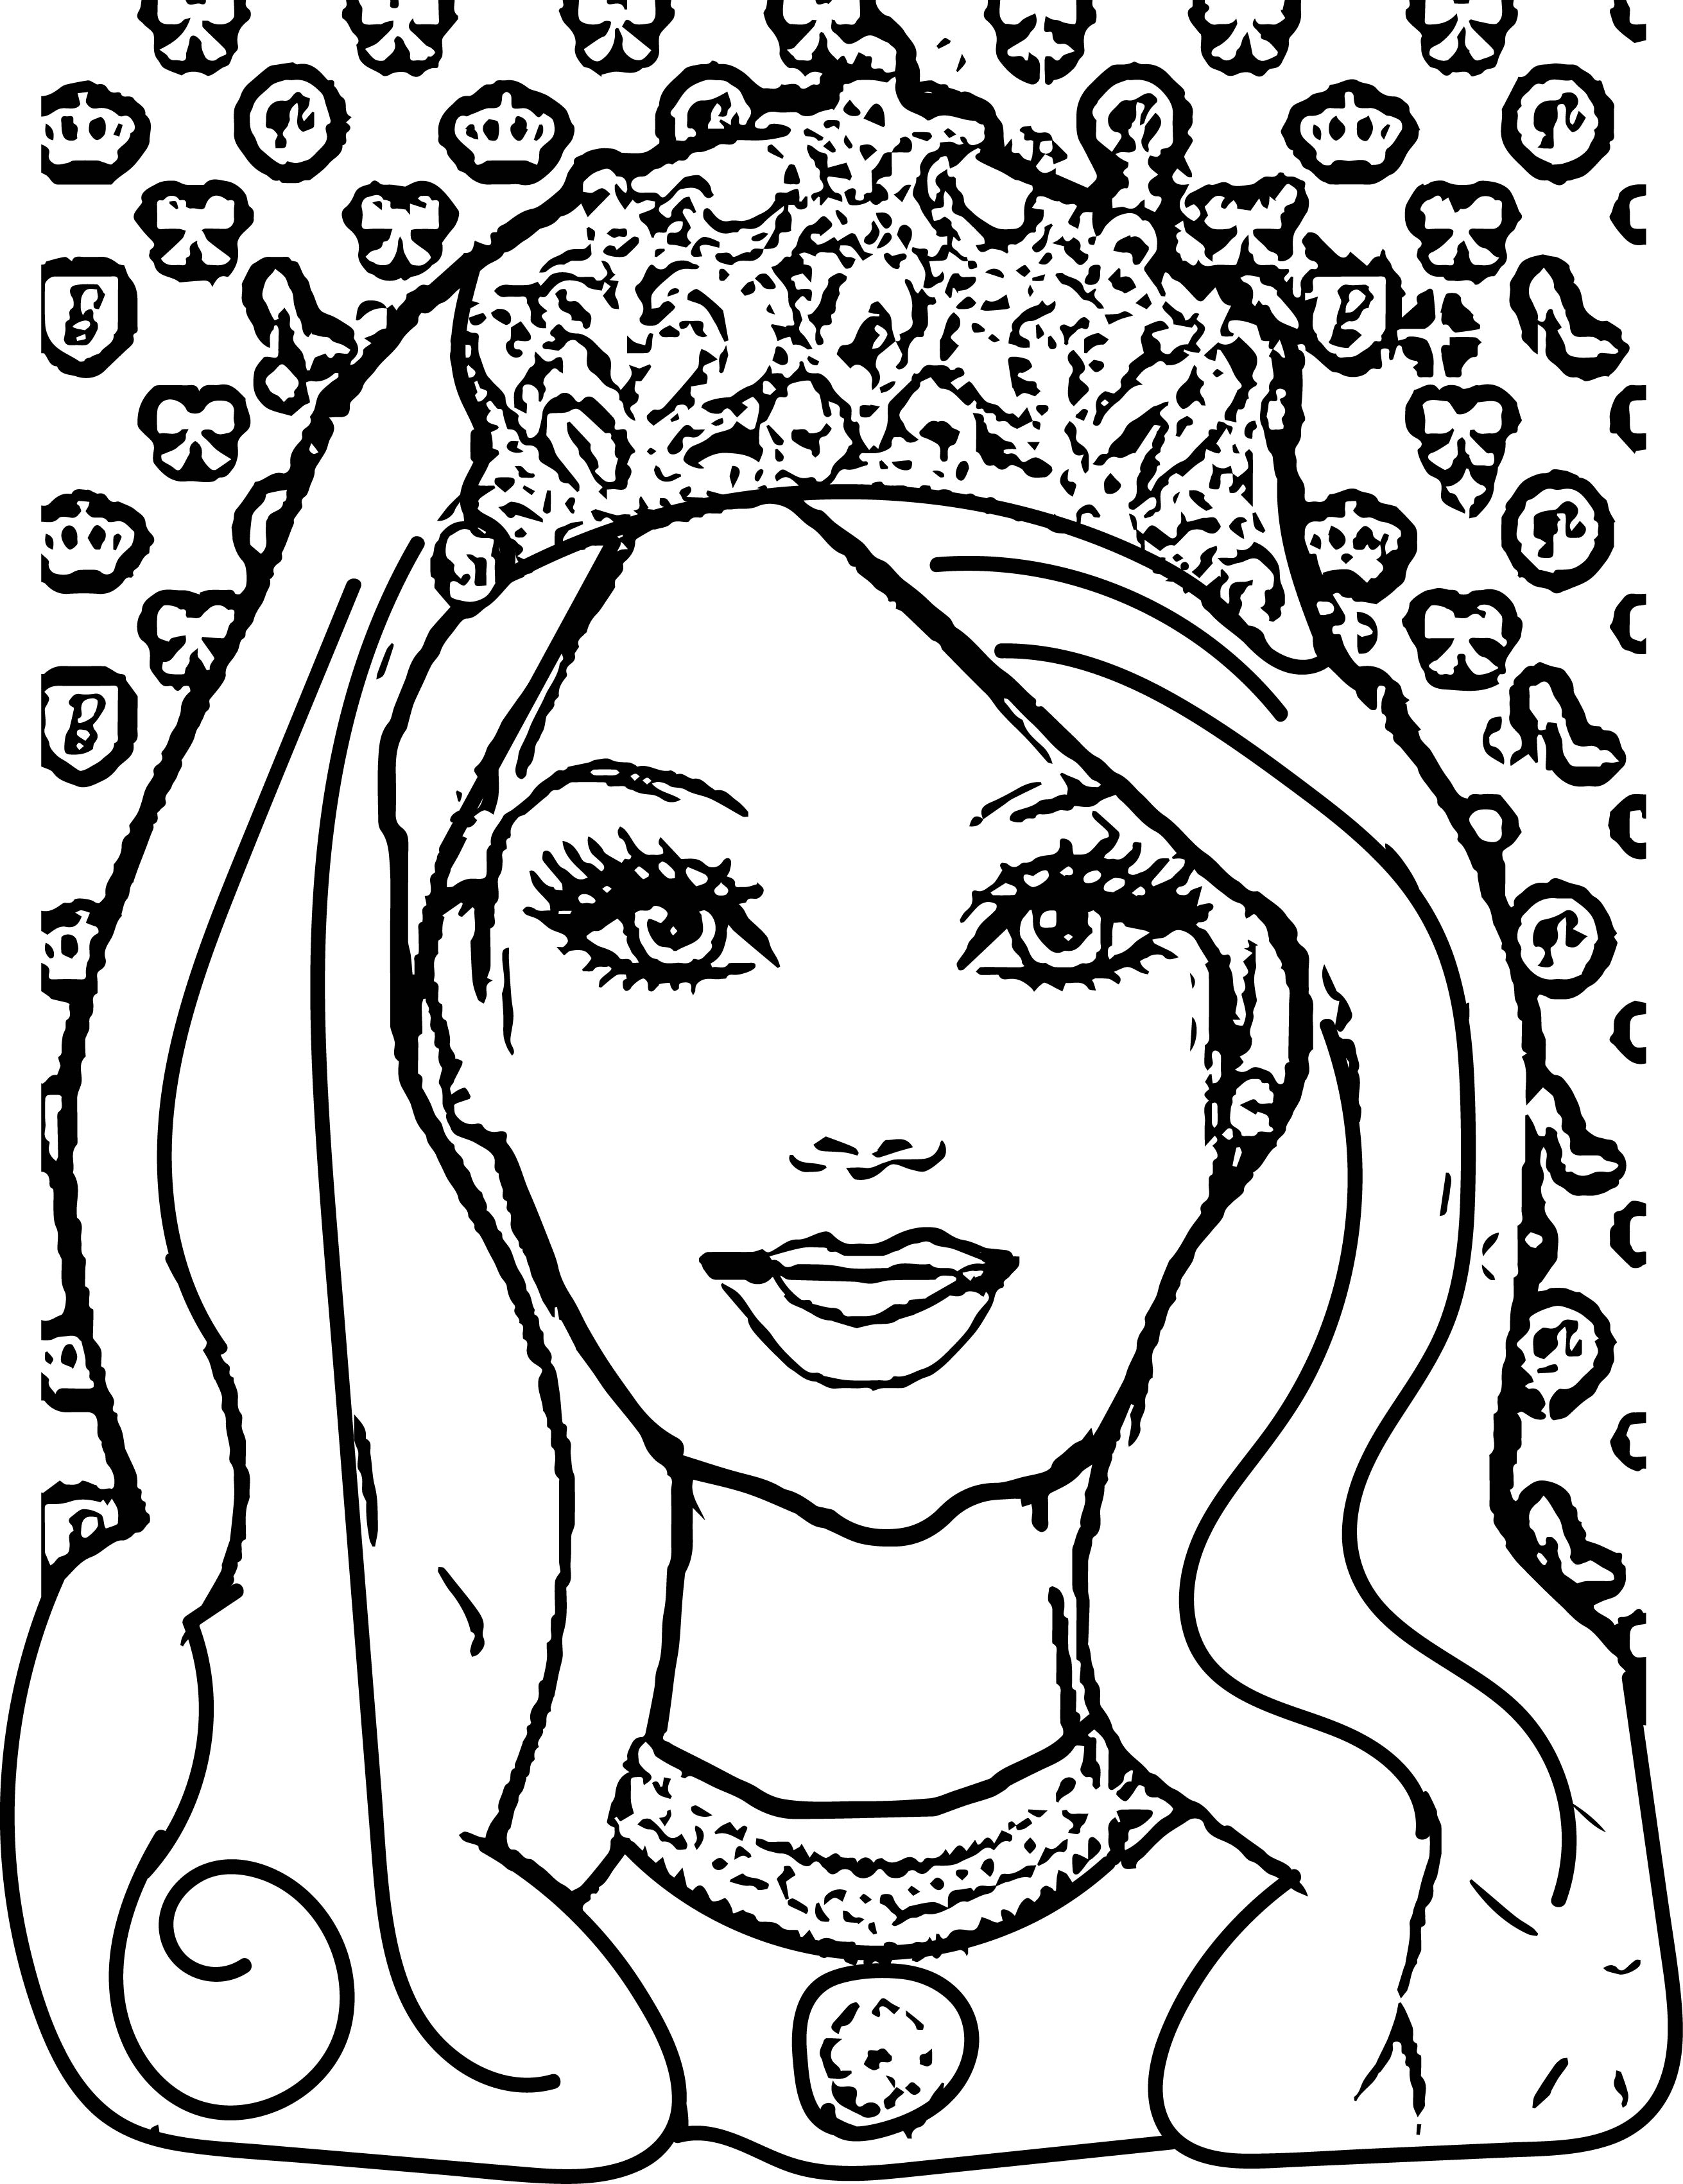 Barbie Face Coloring Pages at GetDrawings.com   Free for ...